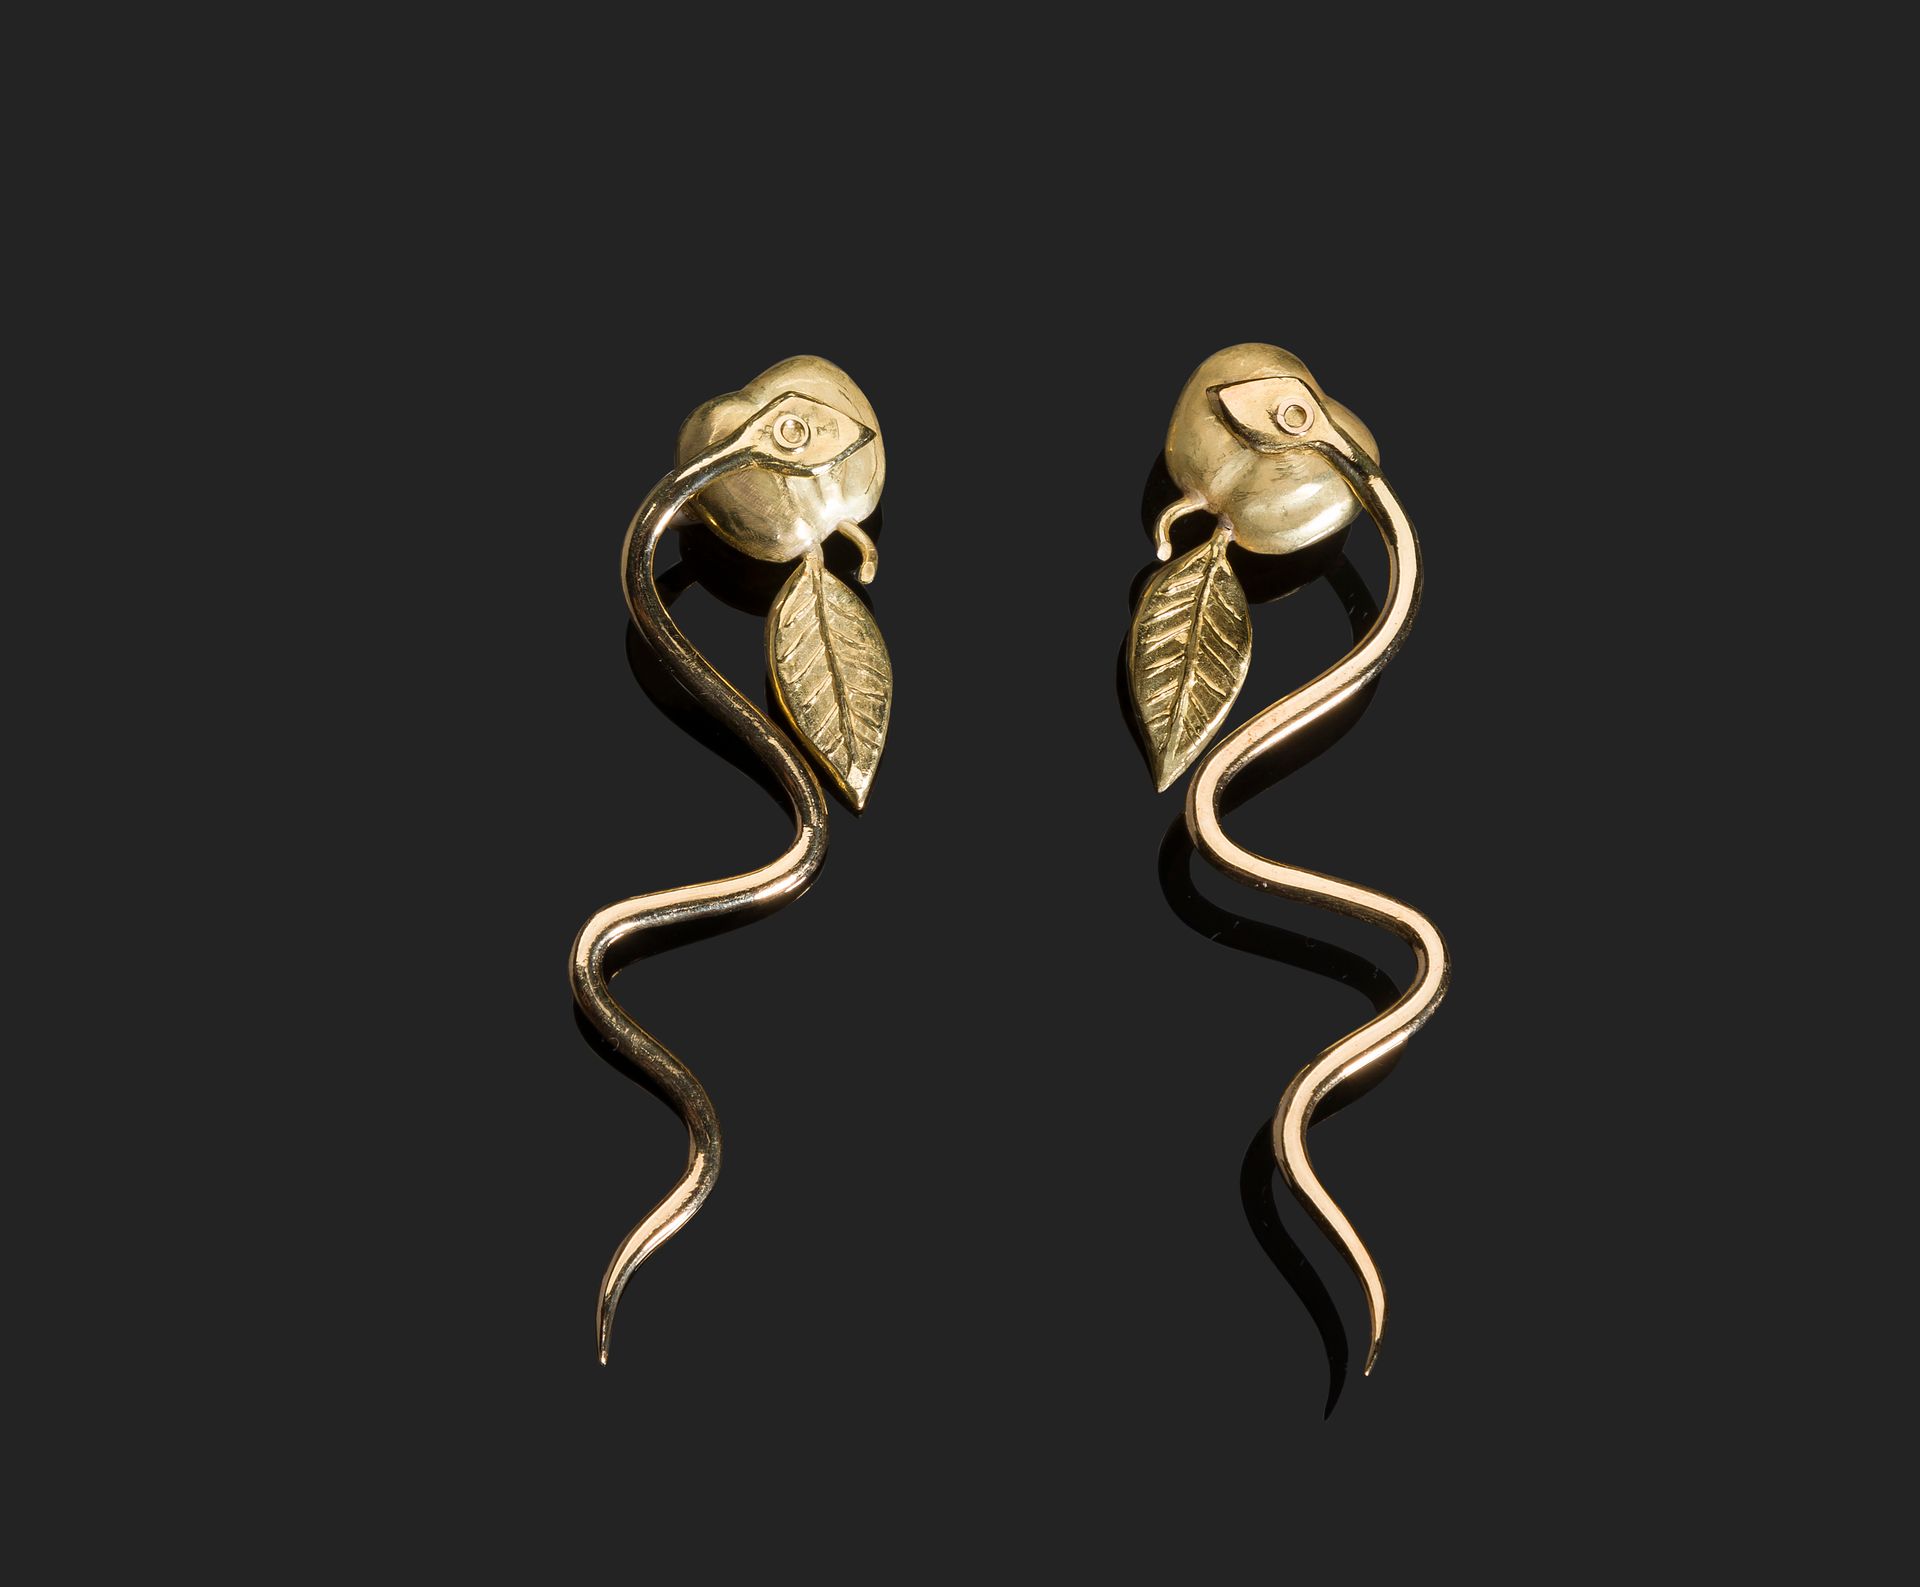 Null Dorothea TANNING (1910-2012)
The Nile
Pair of earrings in 18K gold
Signed a&hellip;